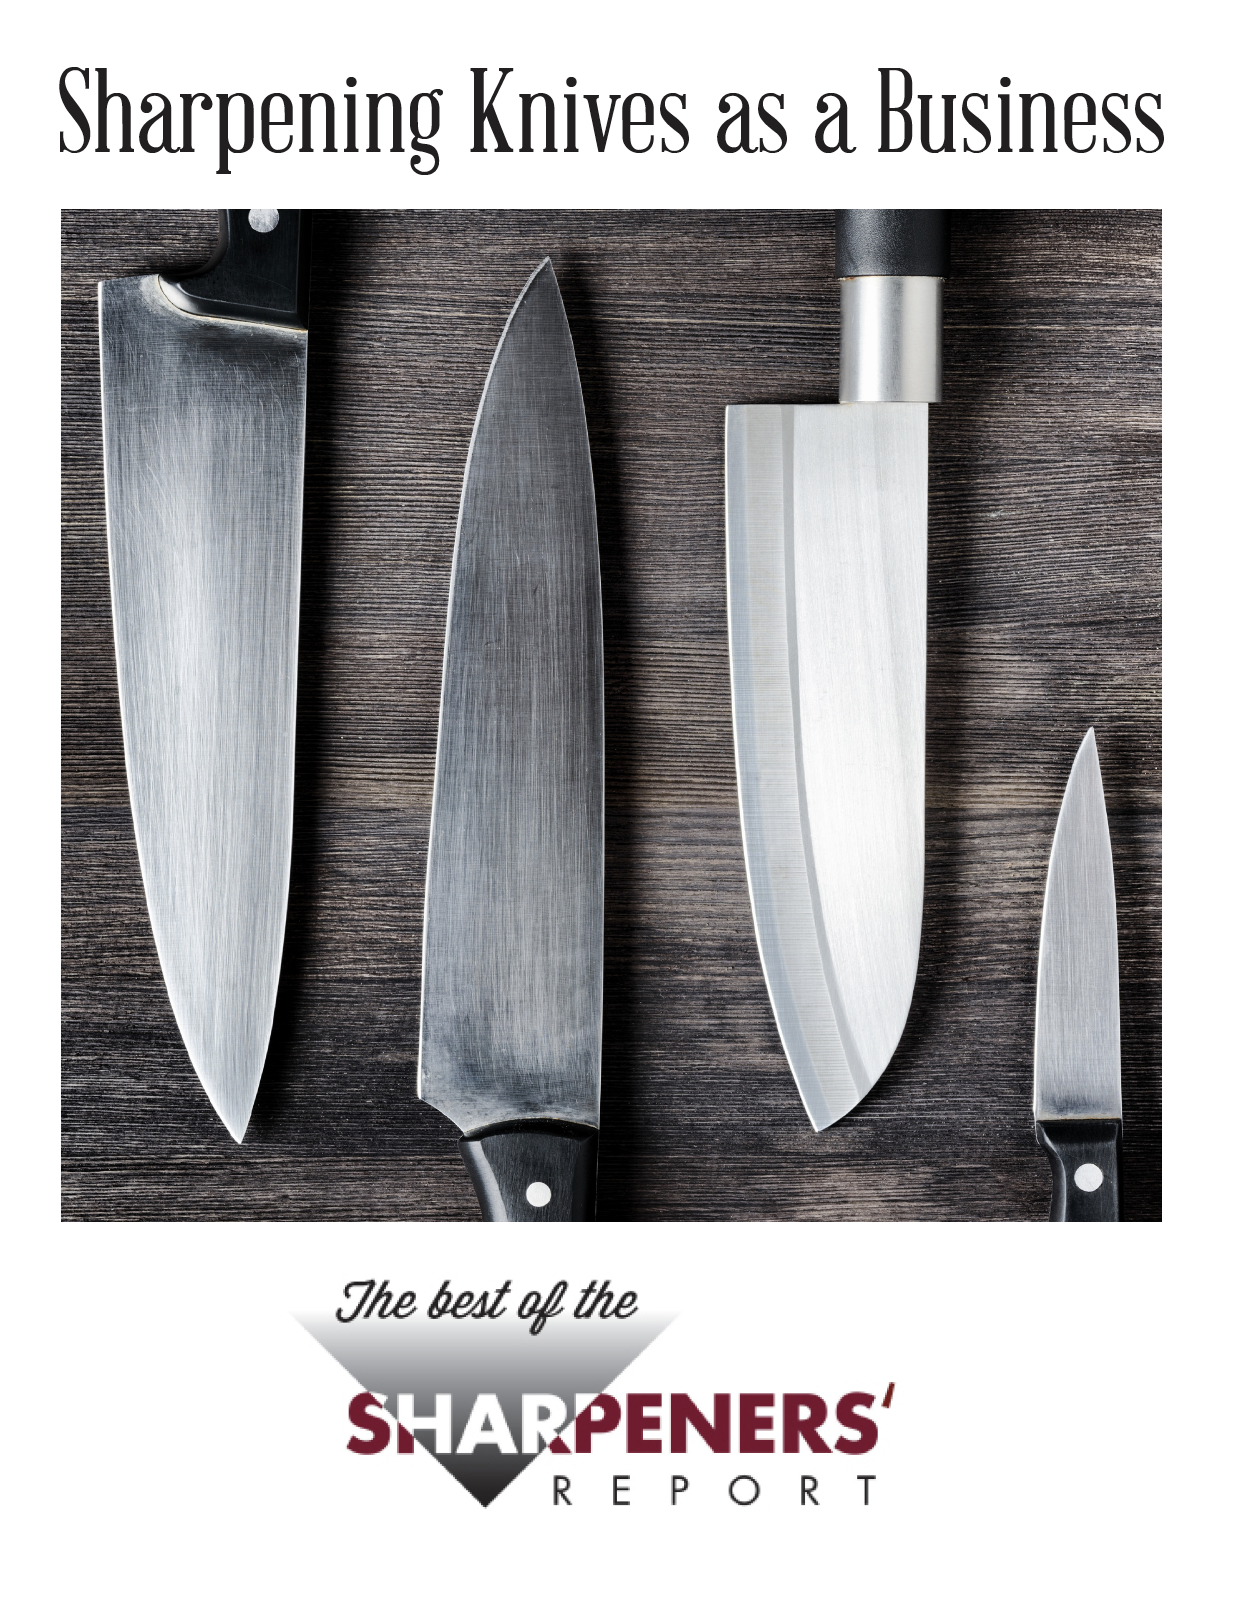 Are cheap knife sharpeners bad for knives? - Quora